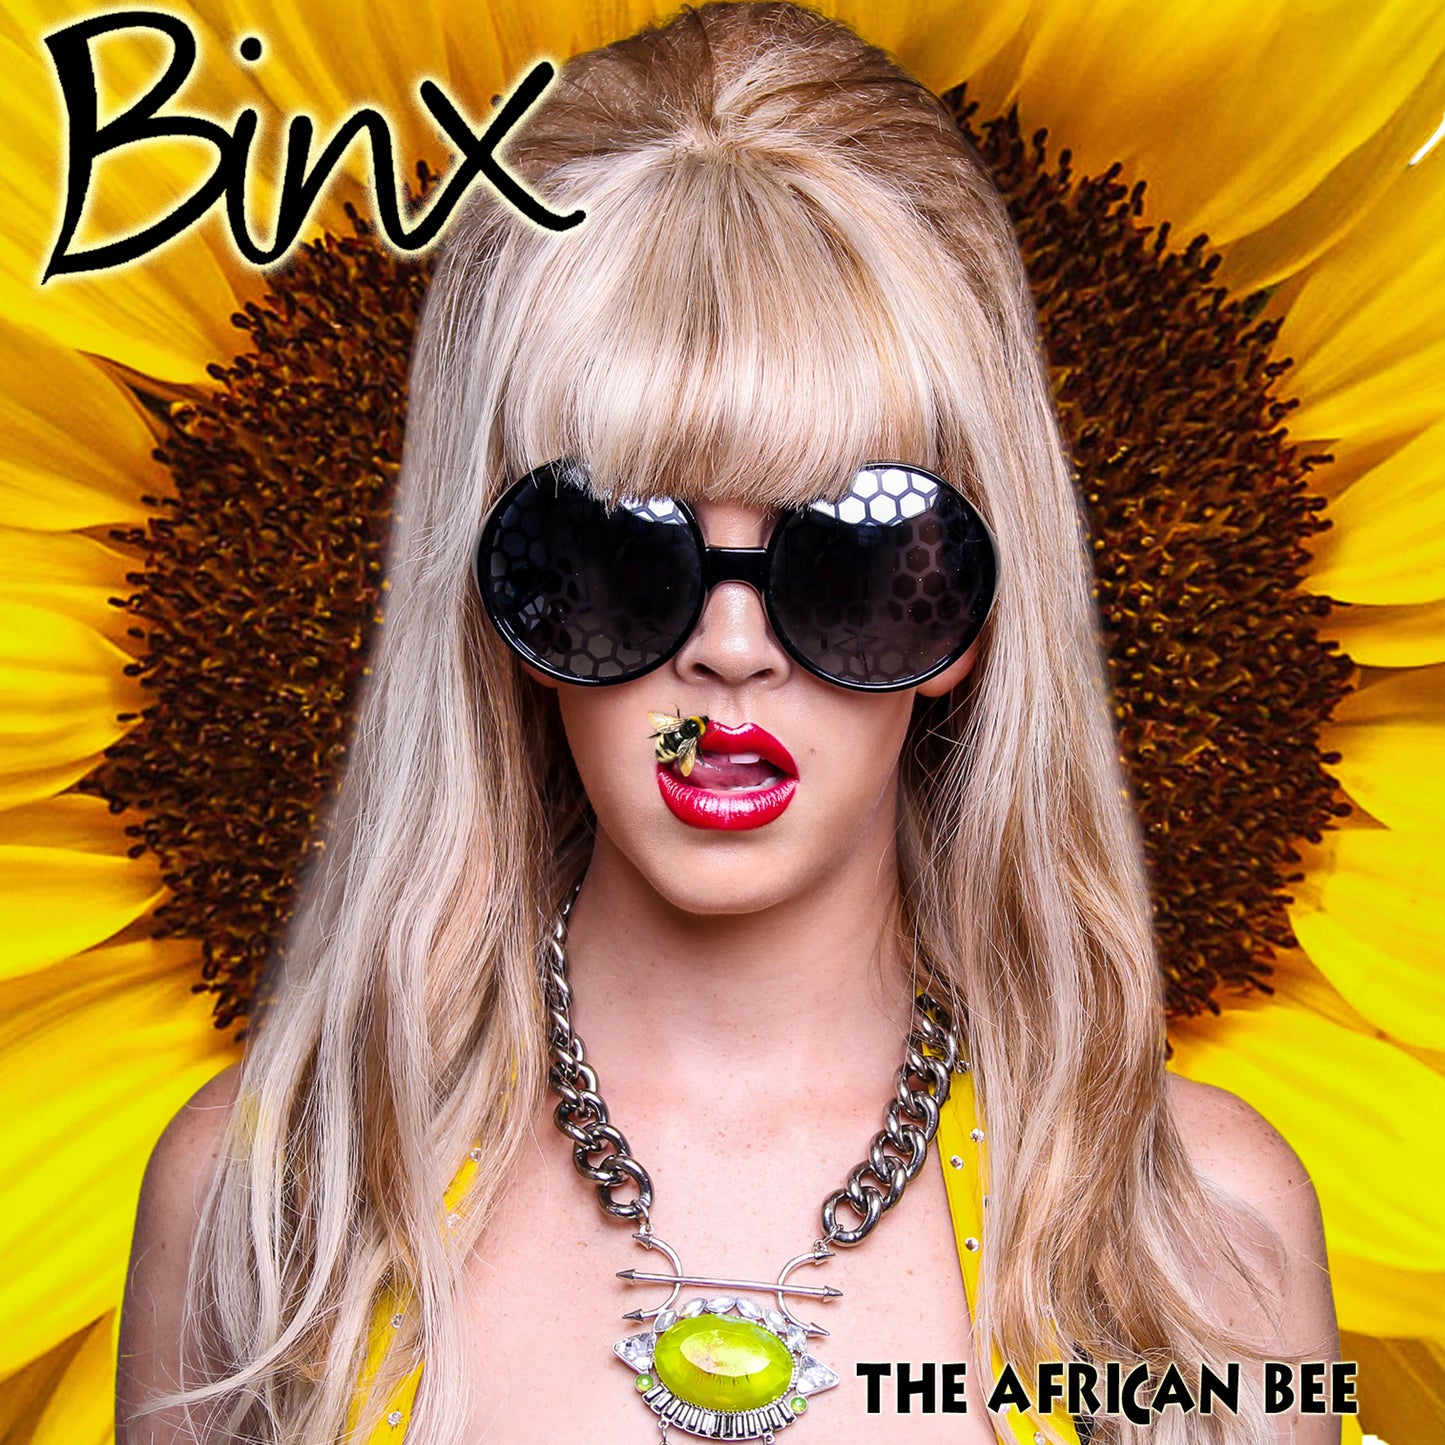 The African Bee - CD (Signed Copy)